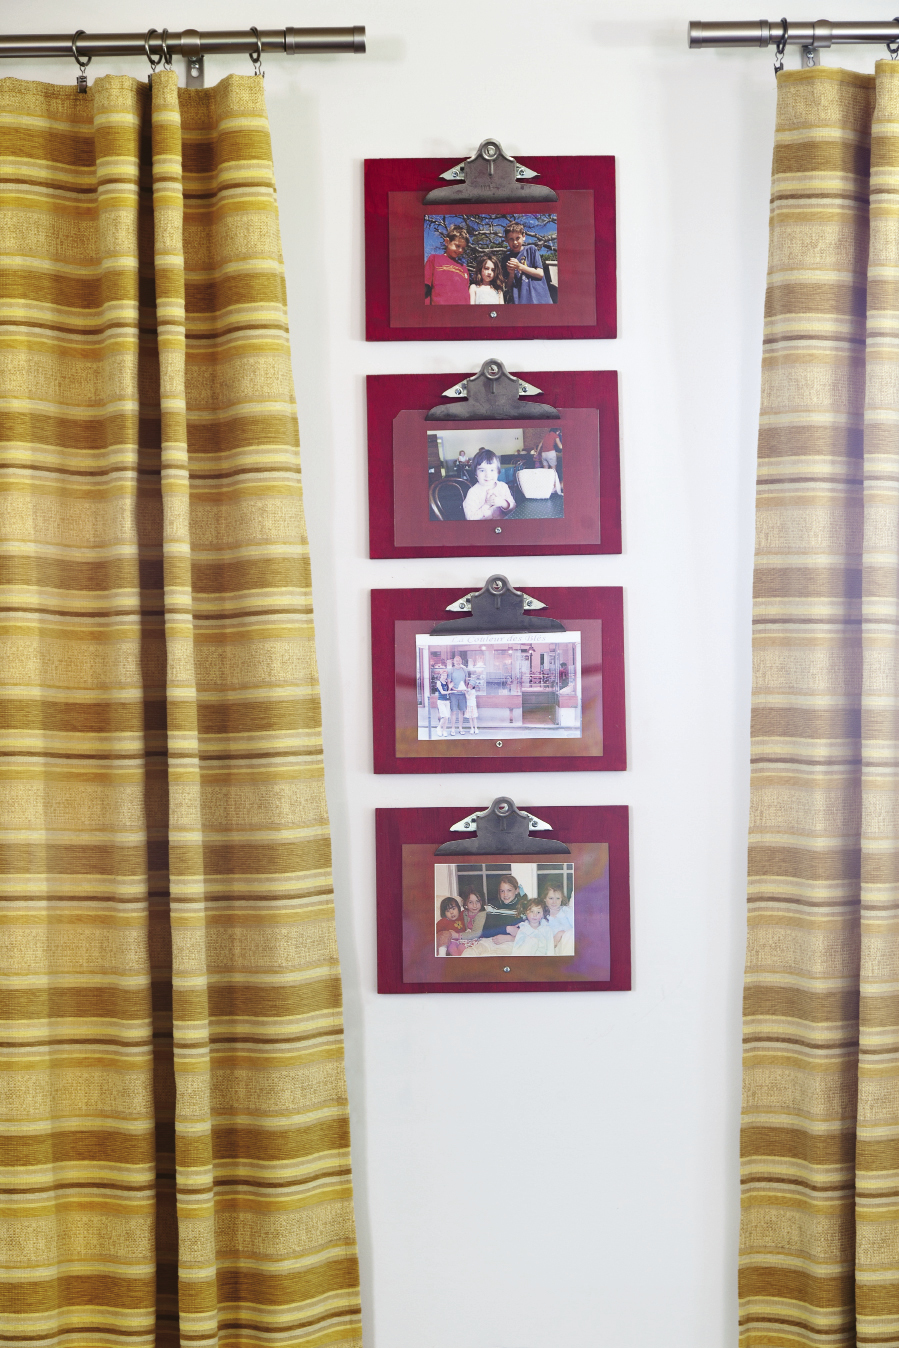 Mathis crafted these frames from plywood, plexiglass, and binder clips. Hung in a group, they elevate family photos into works of art.